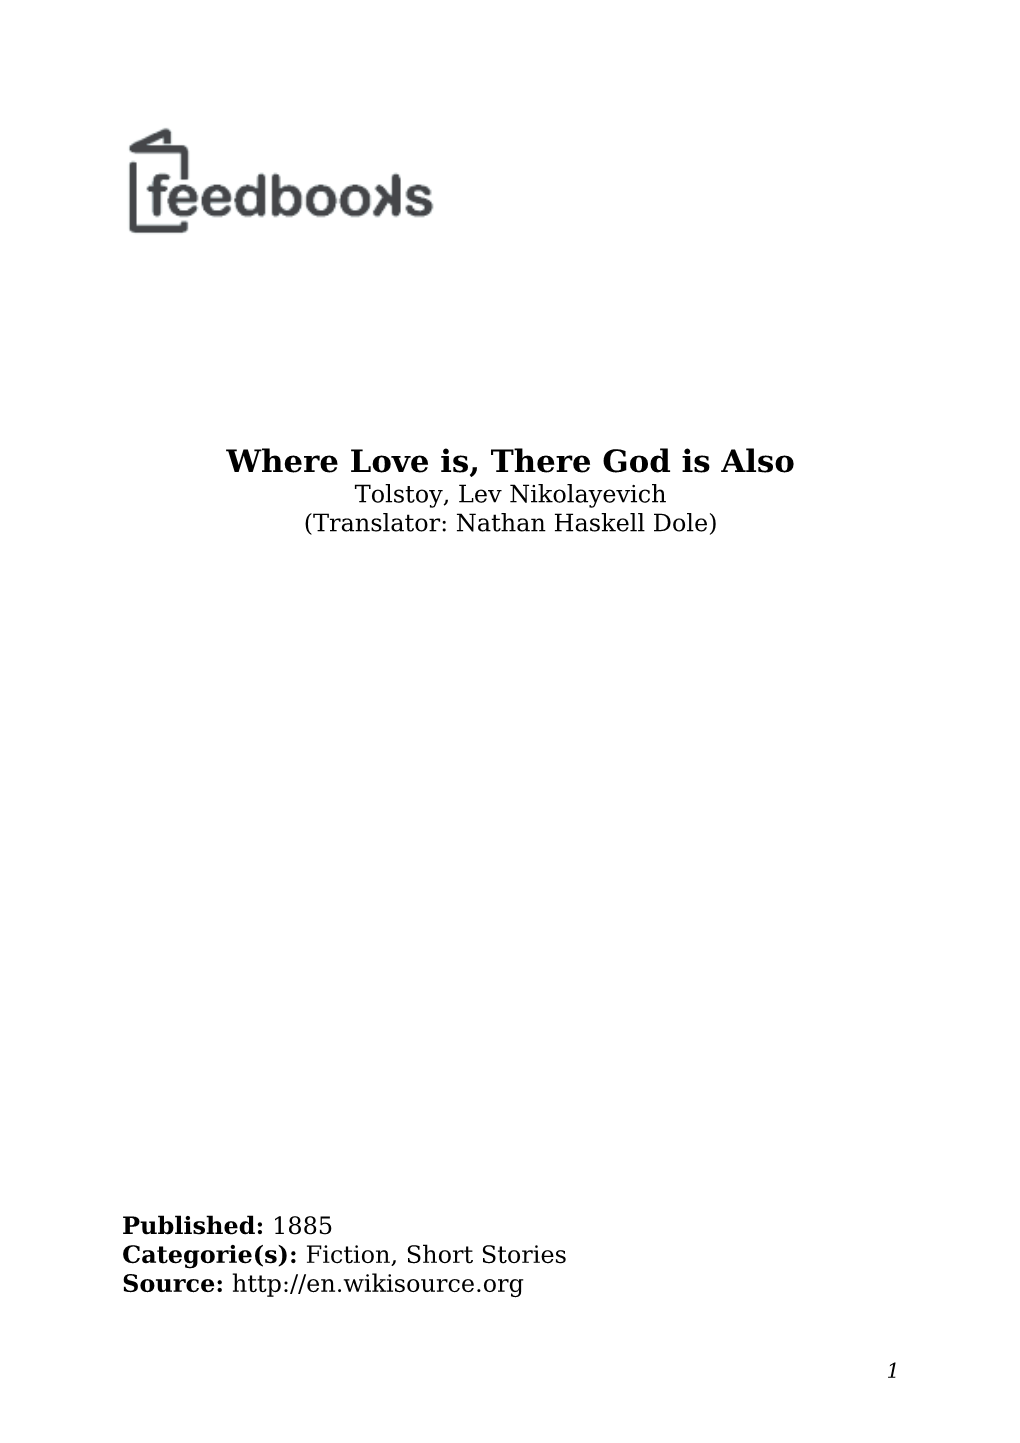 Where Love Is, There God Is Also Tolstoy, Lev Nikolayevich (Translator: Nathan Haskell Dole)